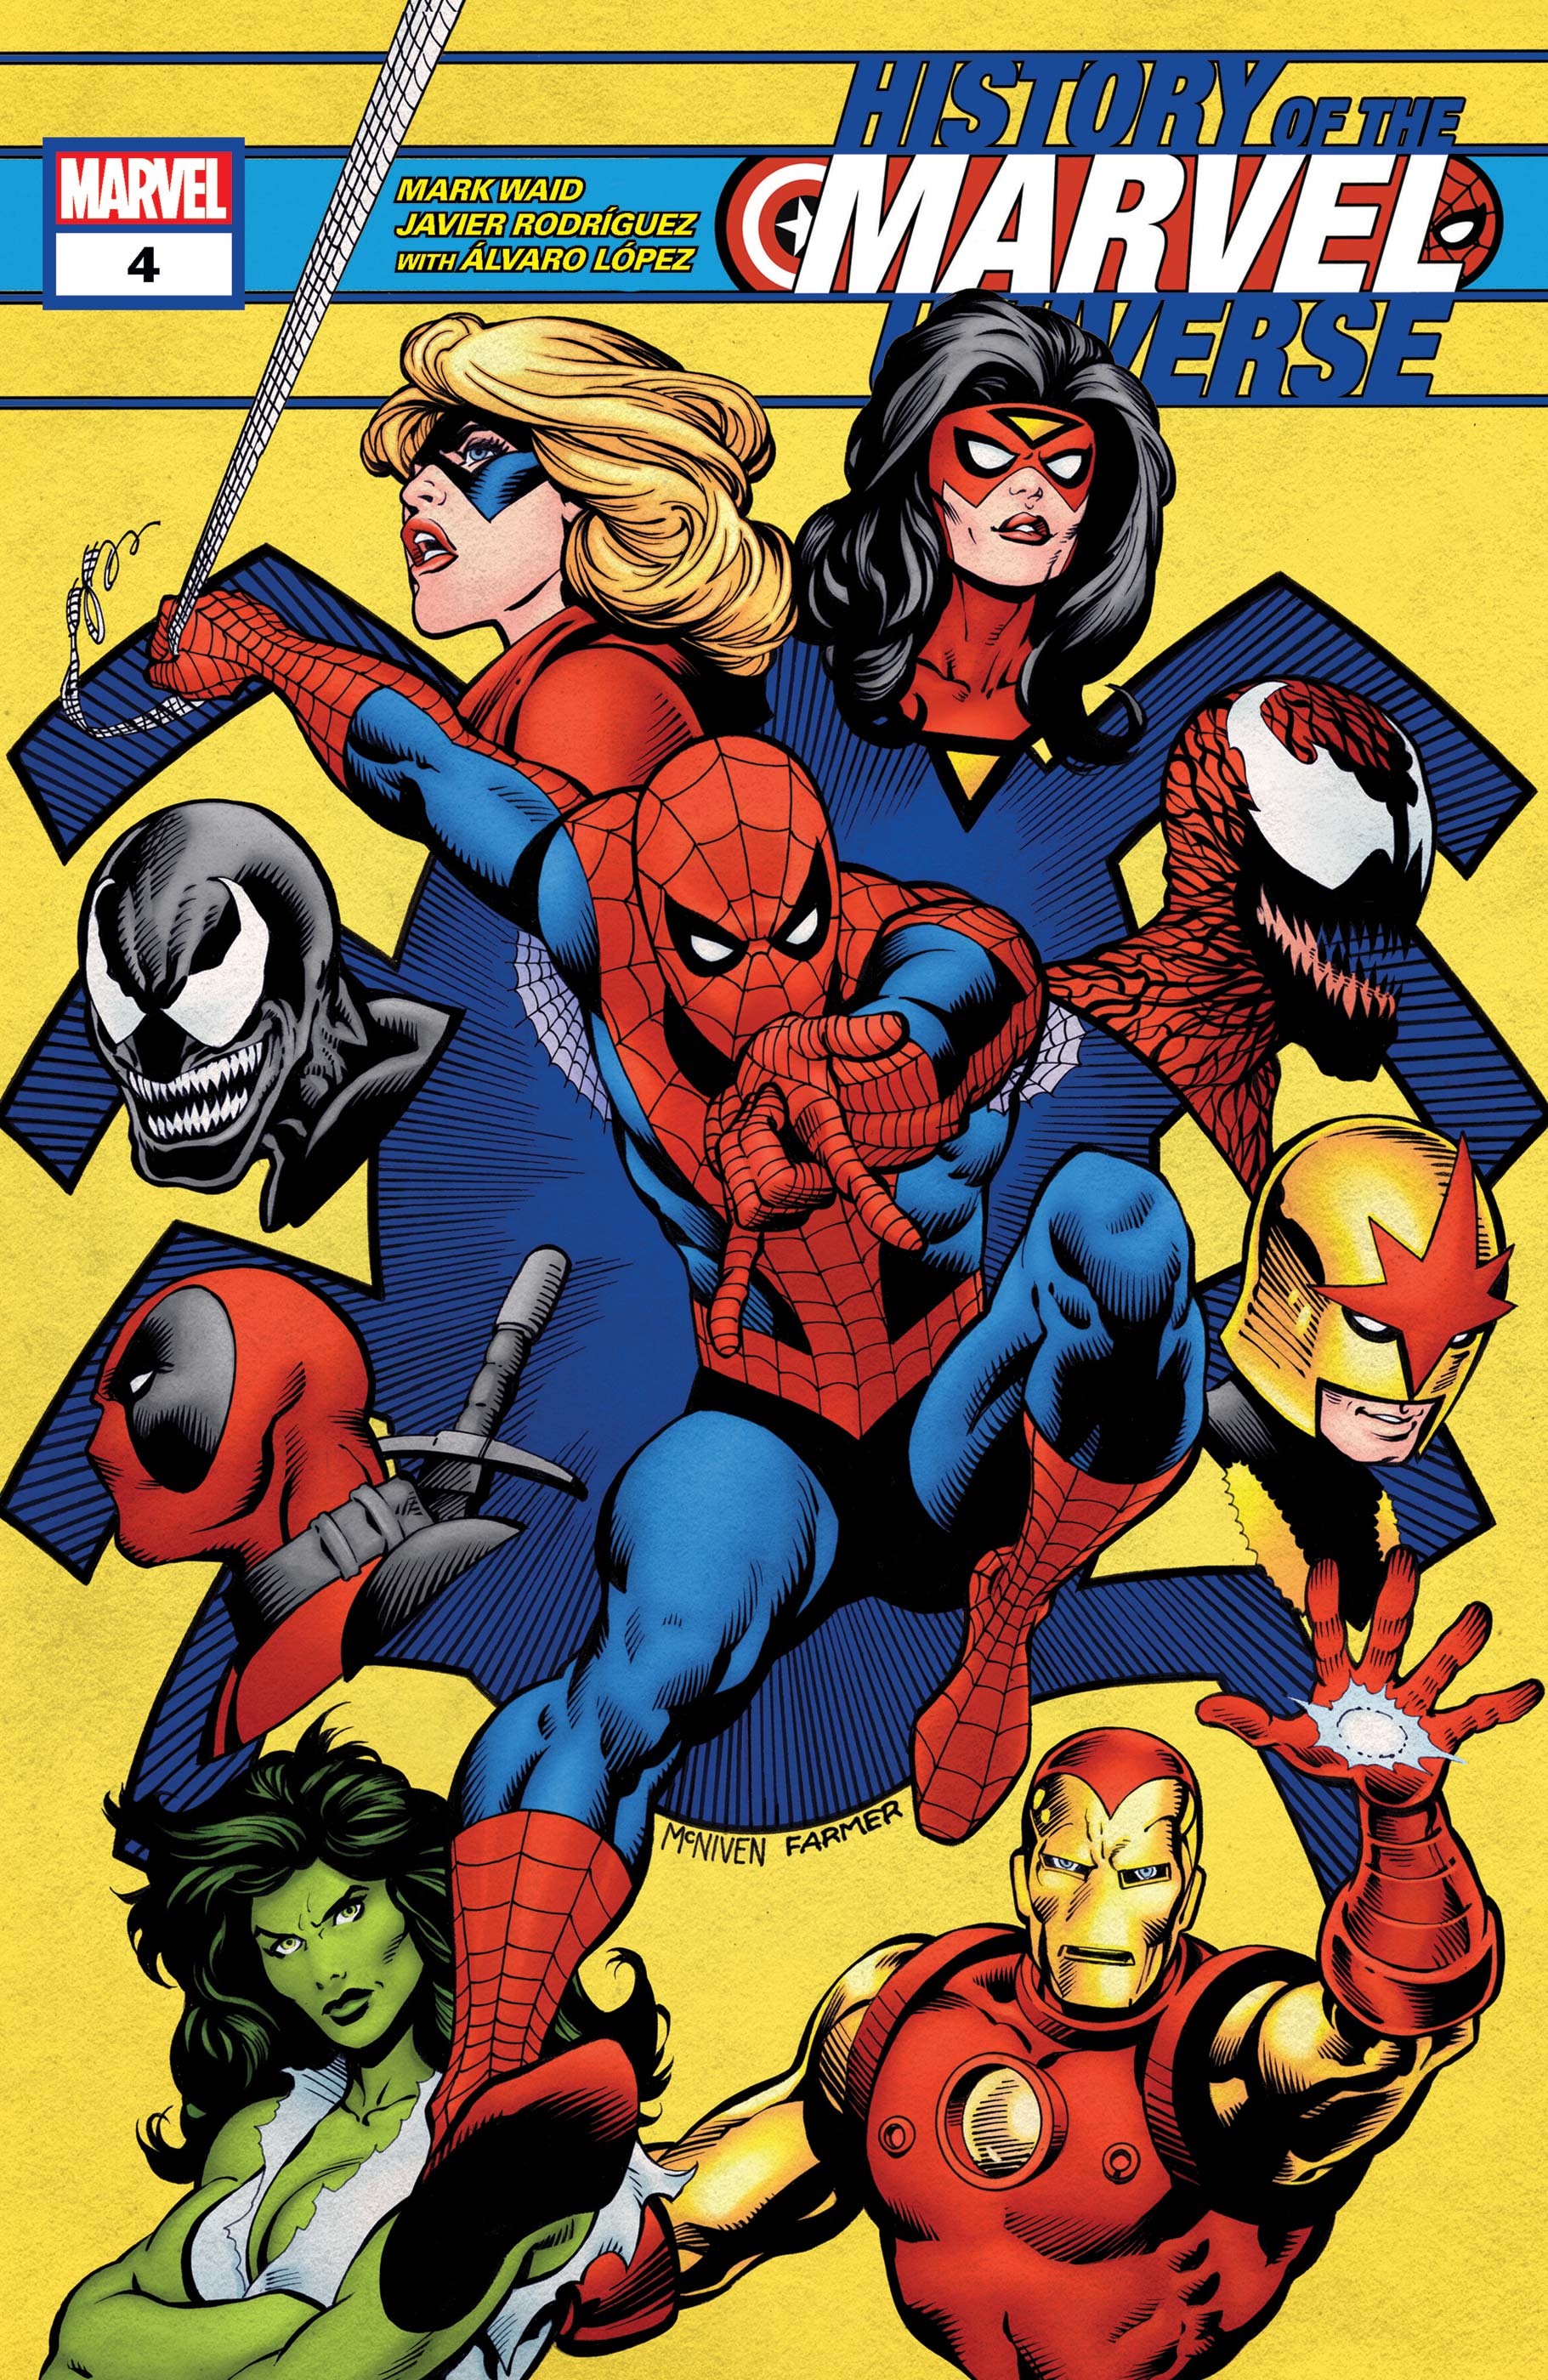 History of the Marvel Universe (2019) #4